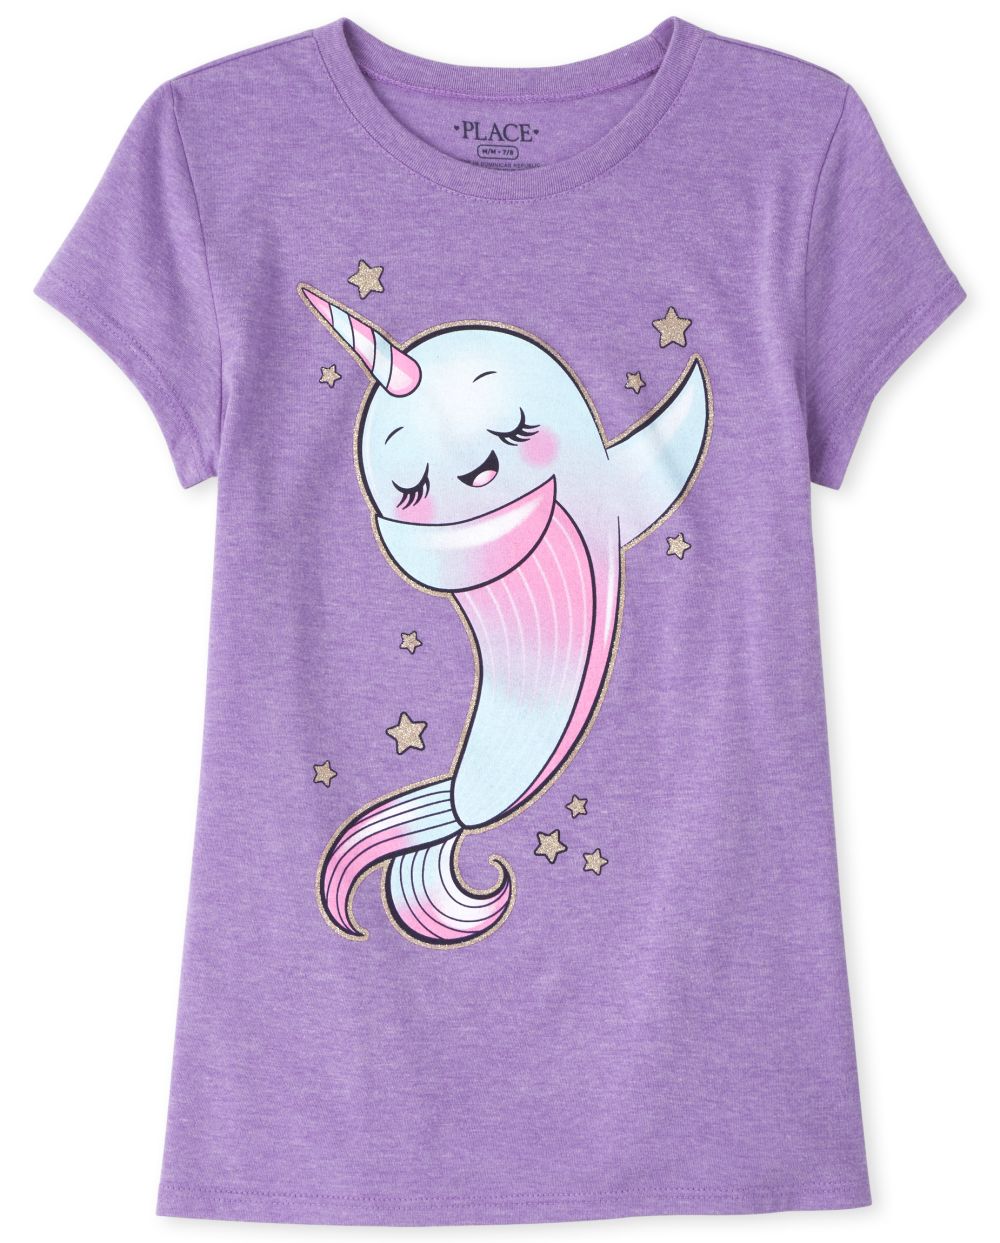 Girls Short Sleeve Narwhal Graphic Tee